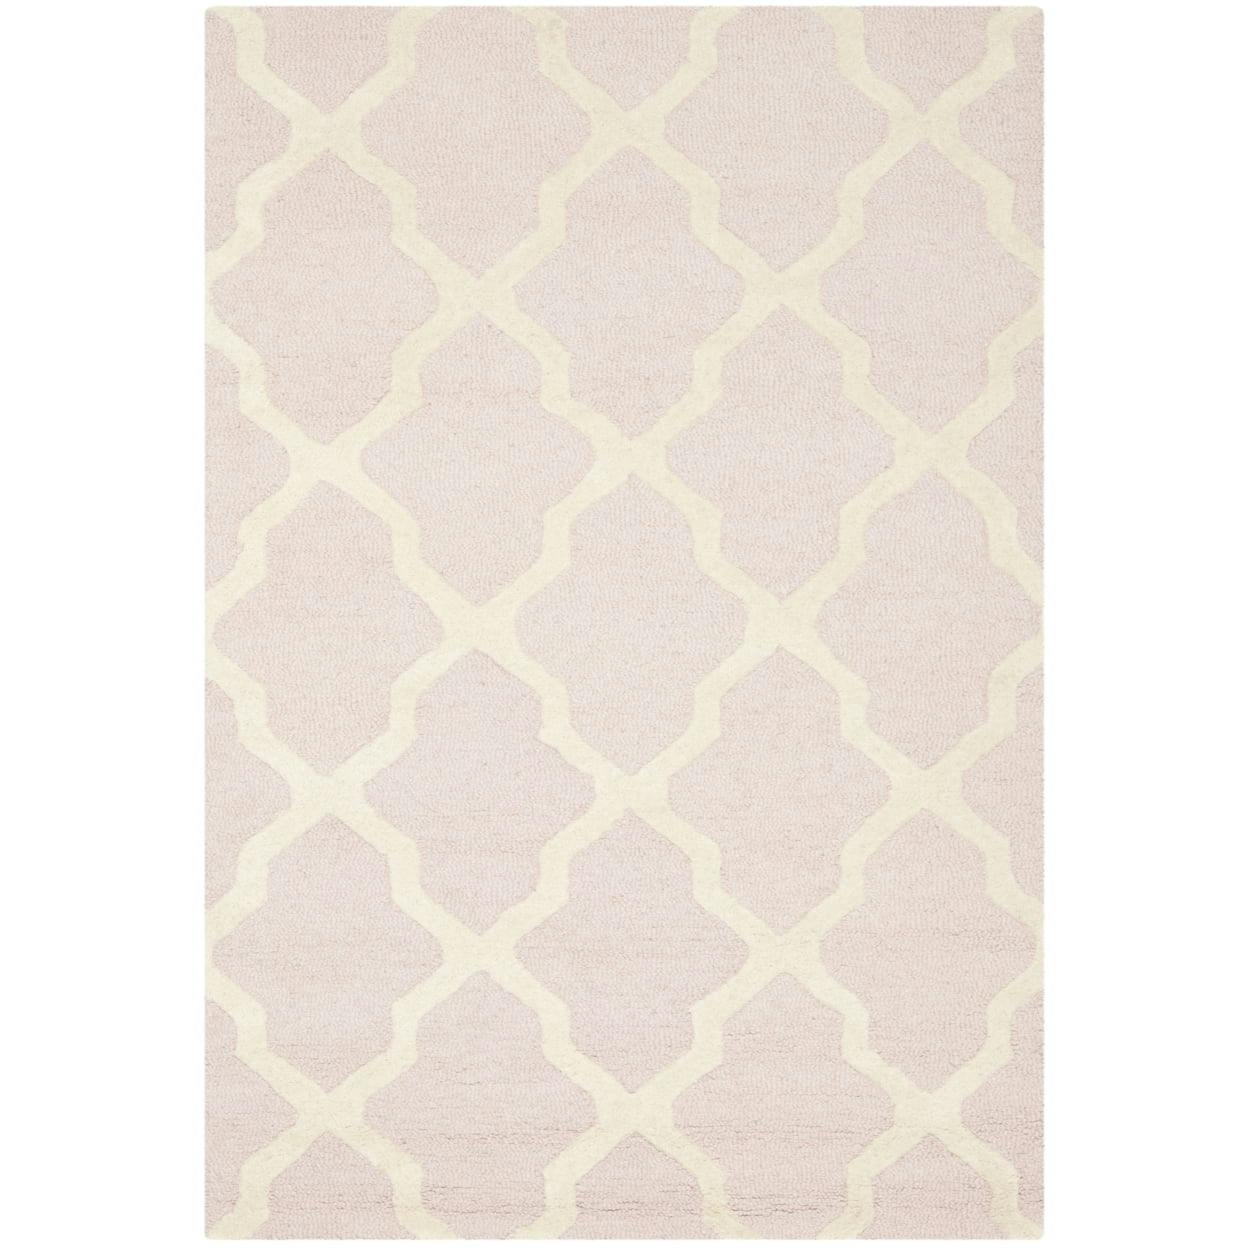 Luxe Light Pink and Ivory Hand-Tufted Wool Area Rug, 3' x 5'